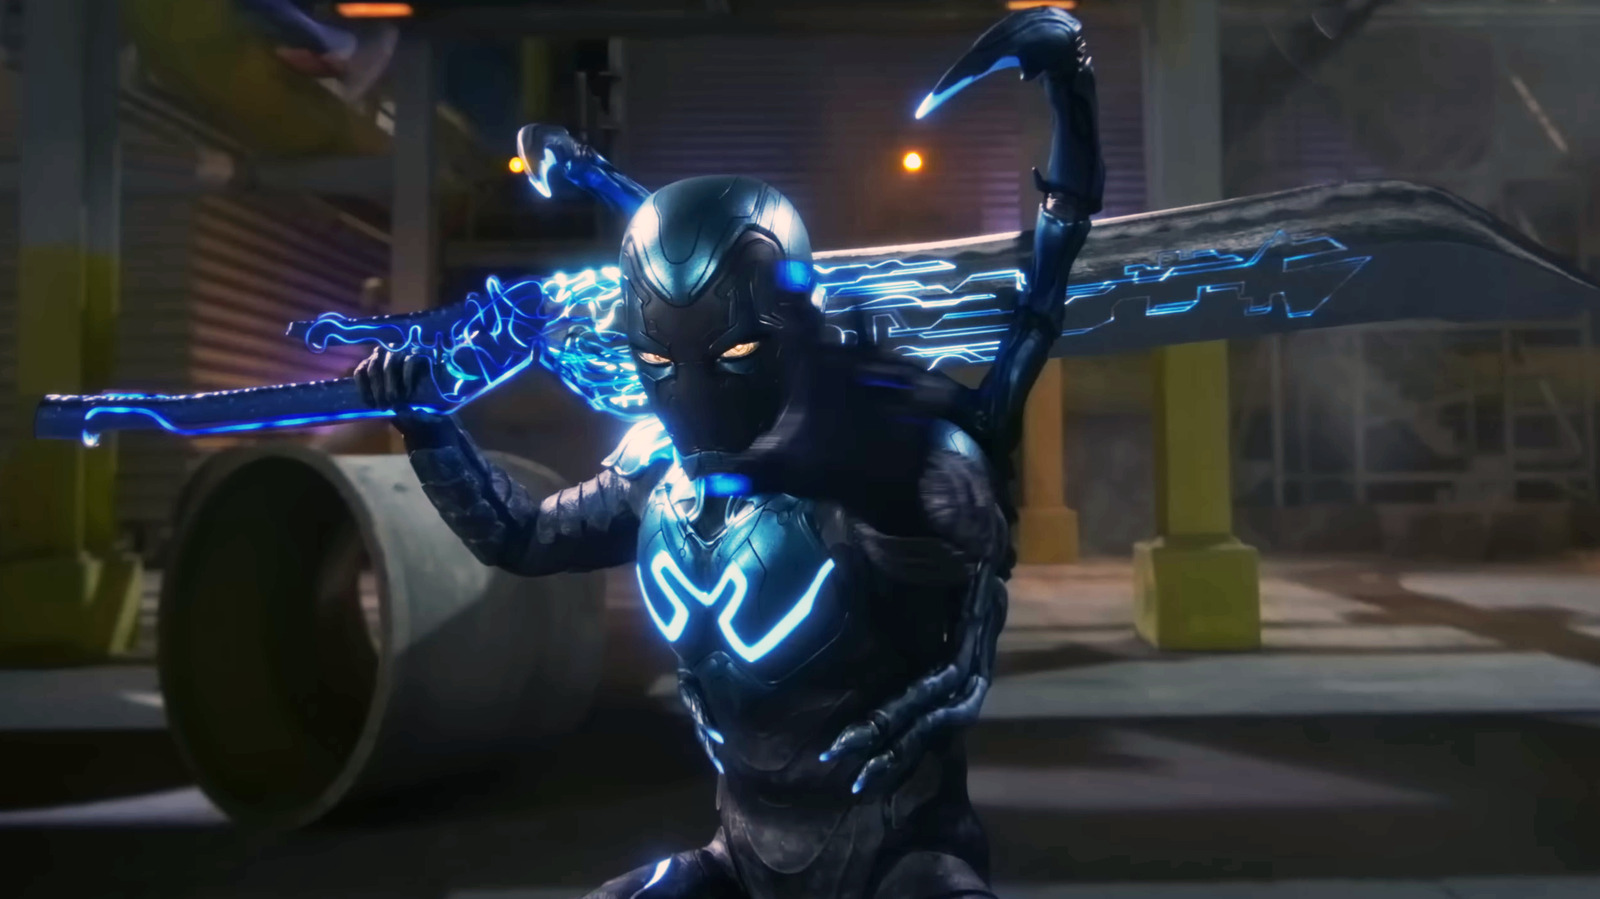 Blue Beetle: DC movie release date, cast, and trailer